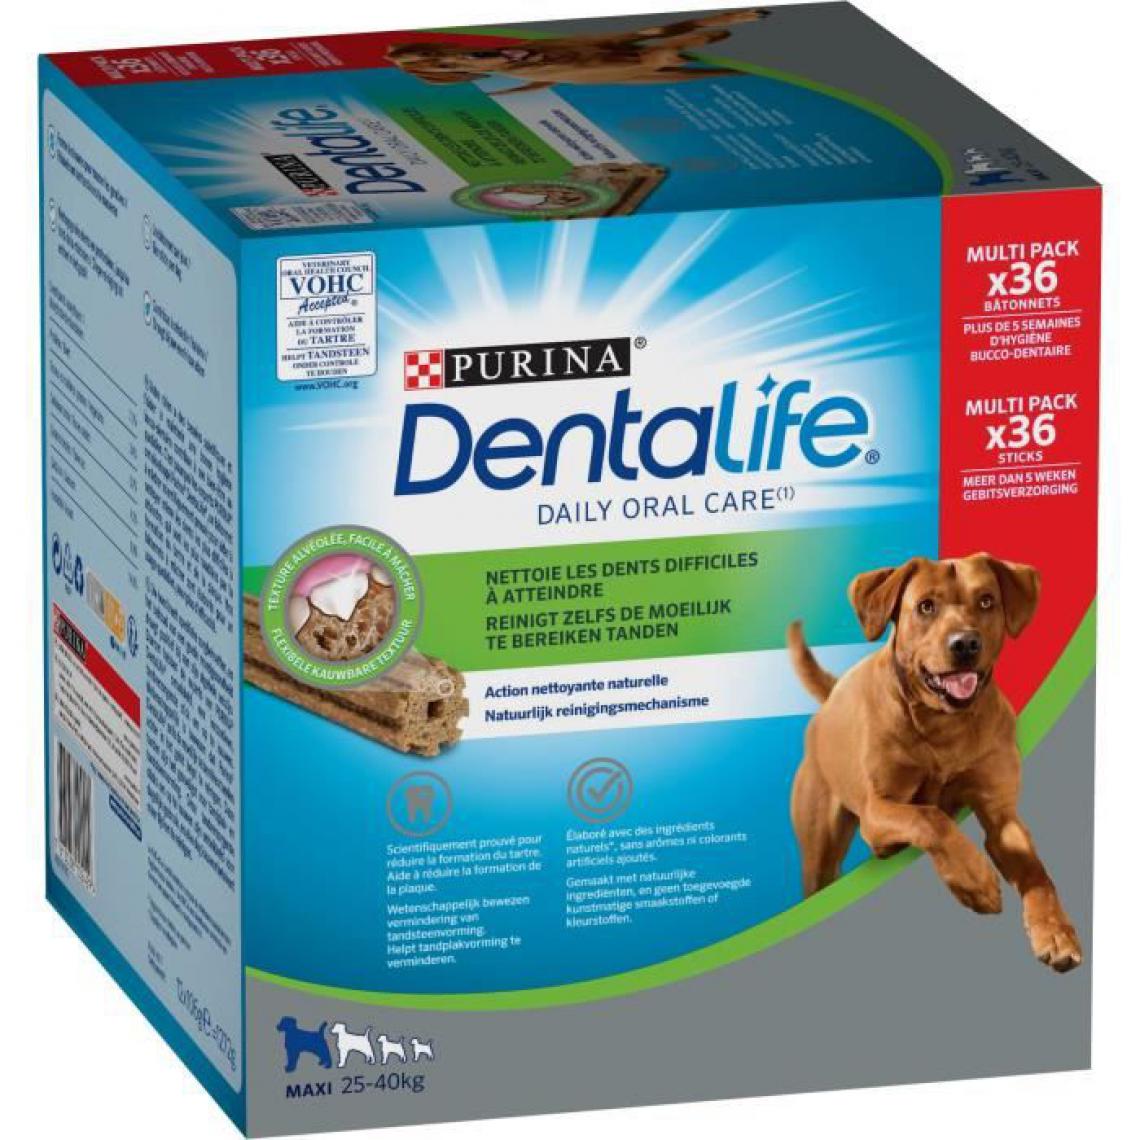 Dentalife - Maxi - MultiPack 1272 g - Friandise pour chien